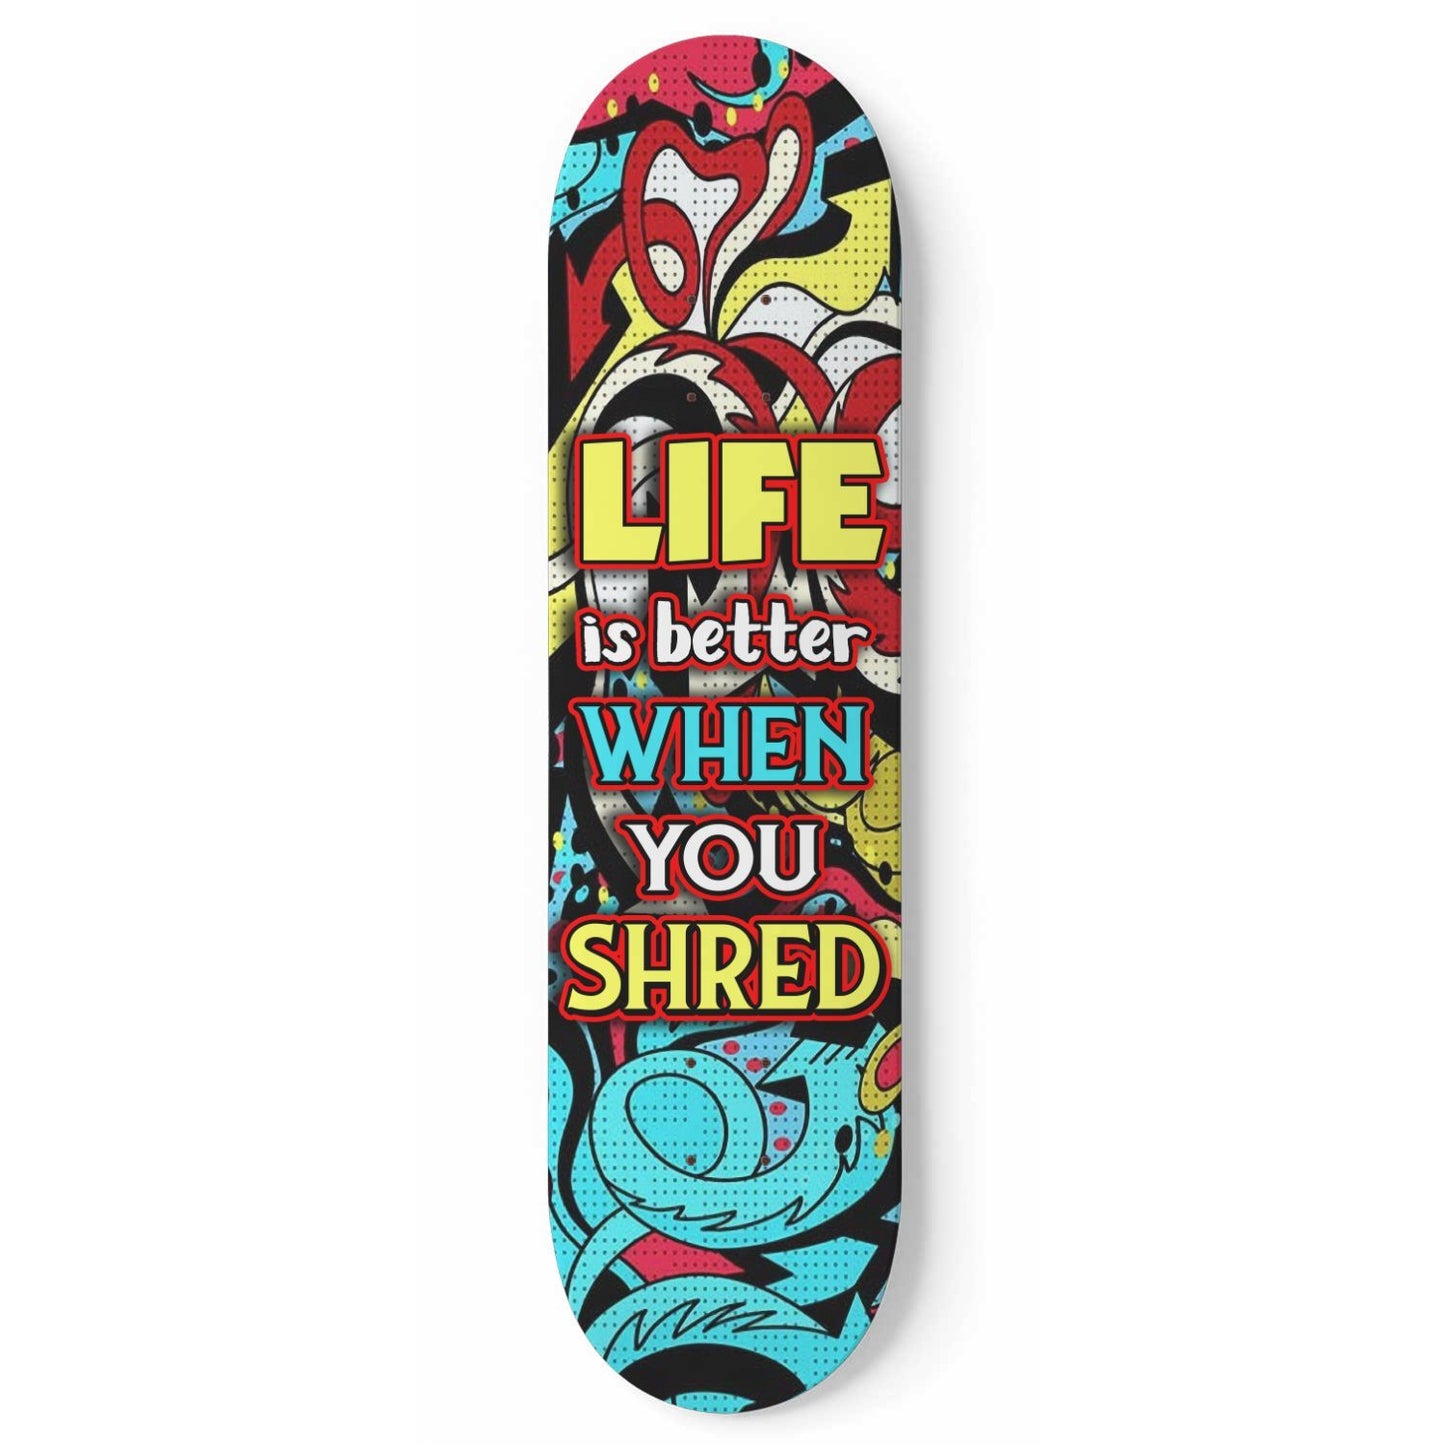 Life Is Better When You Shred #1.0.0